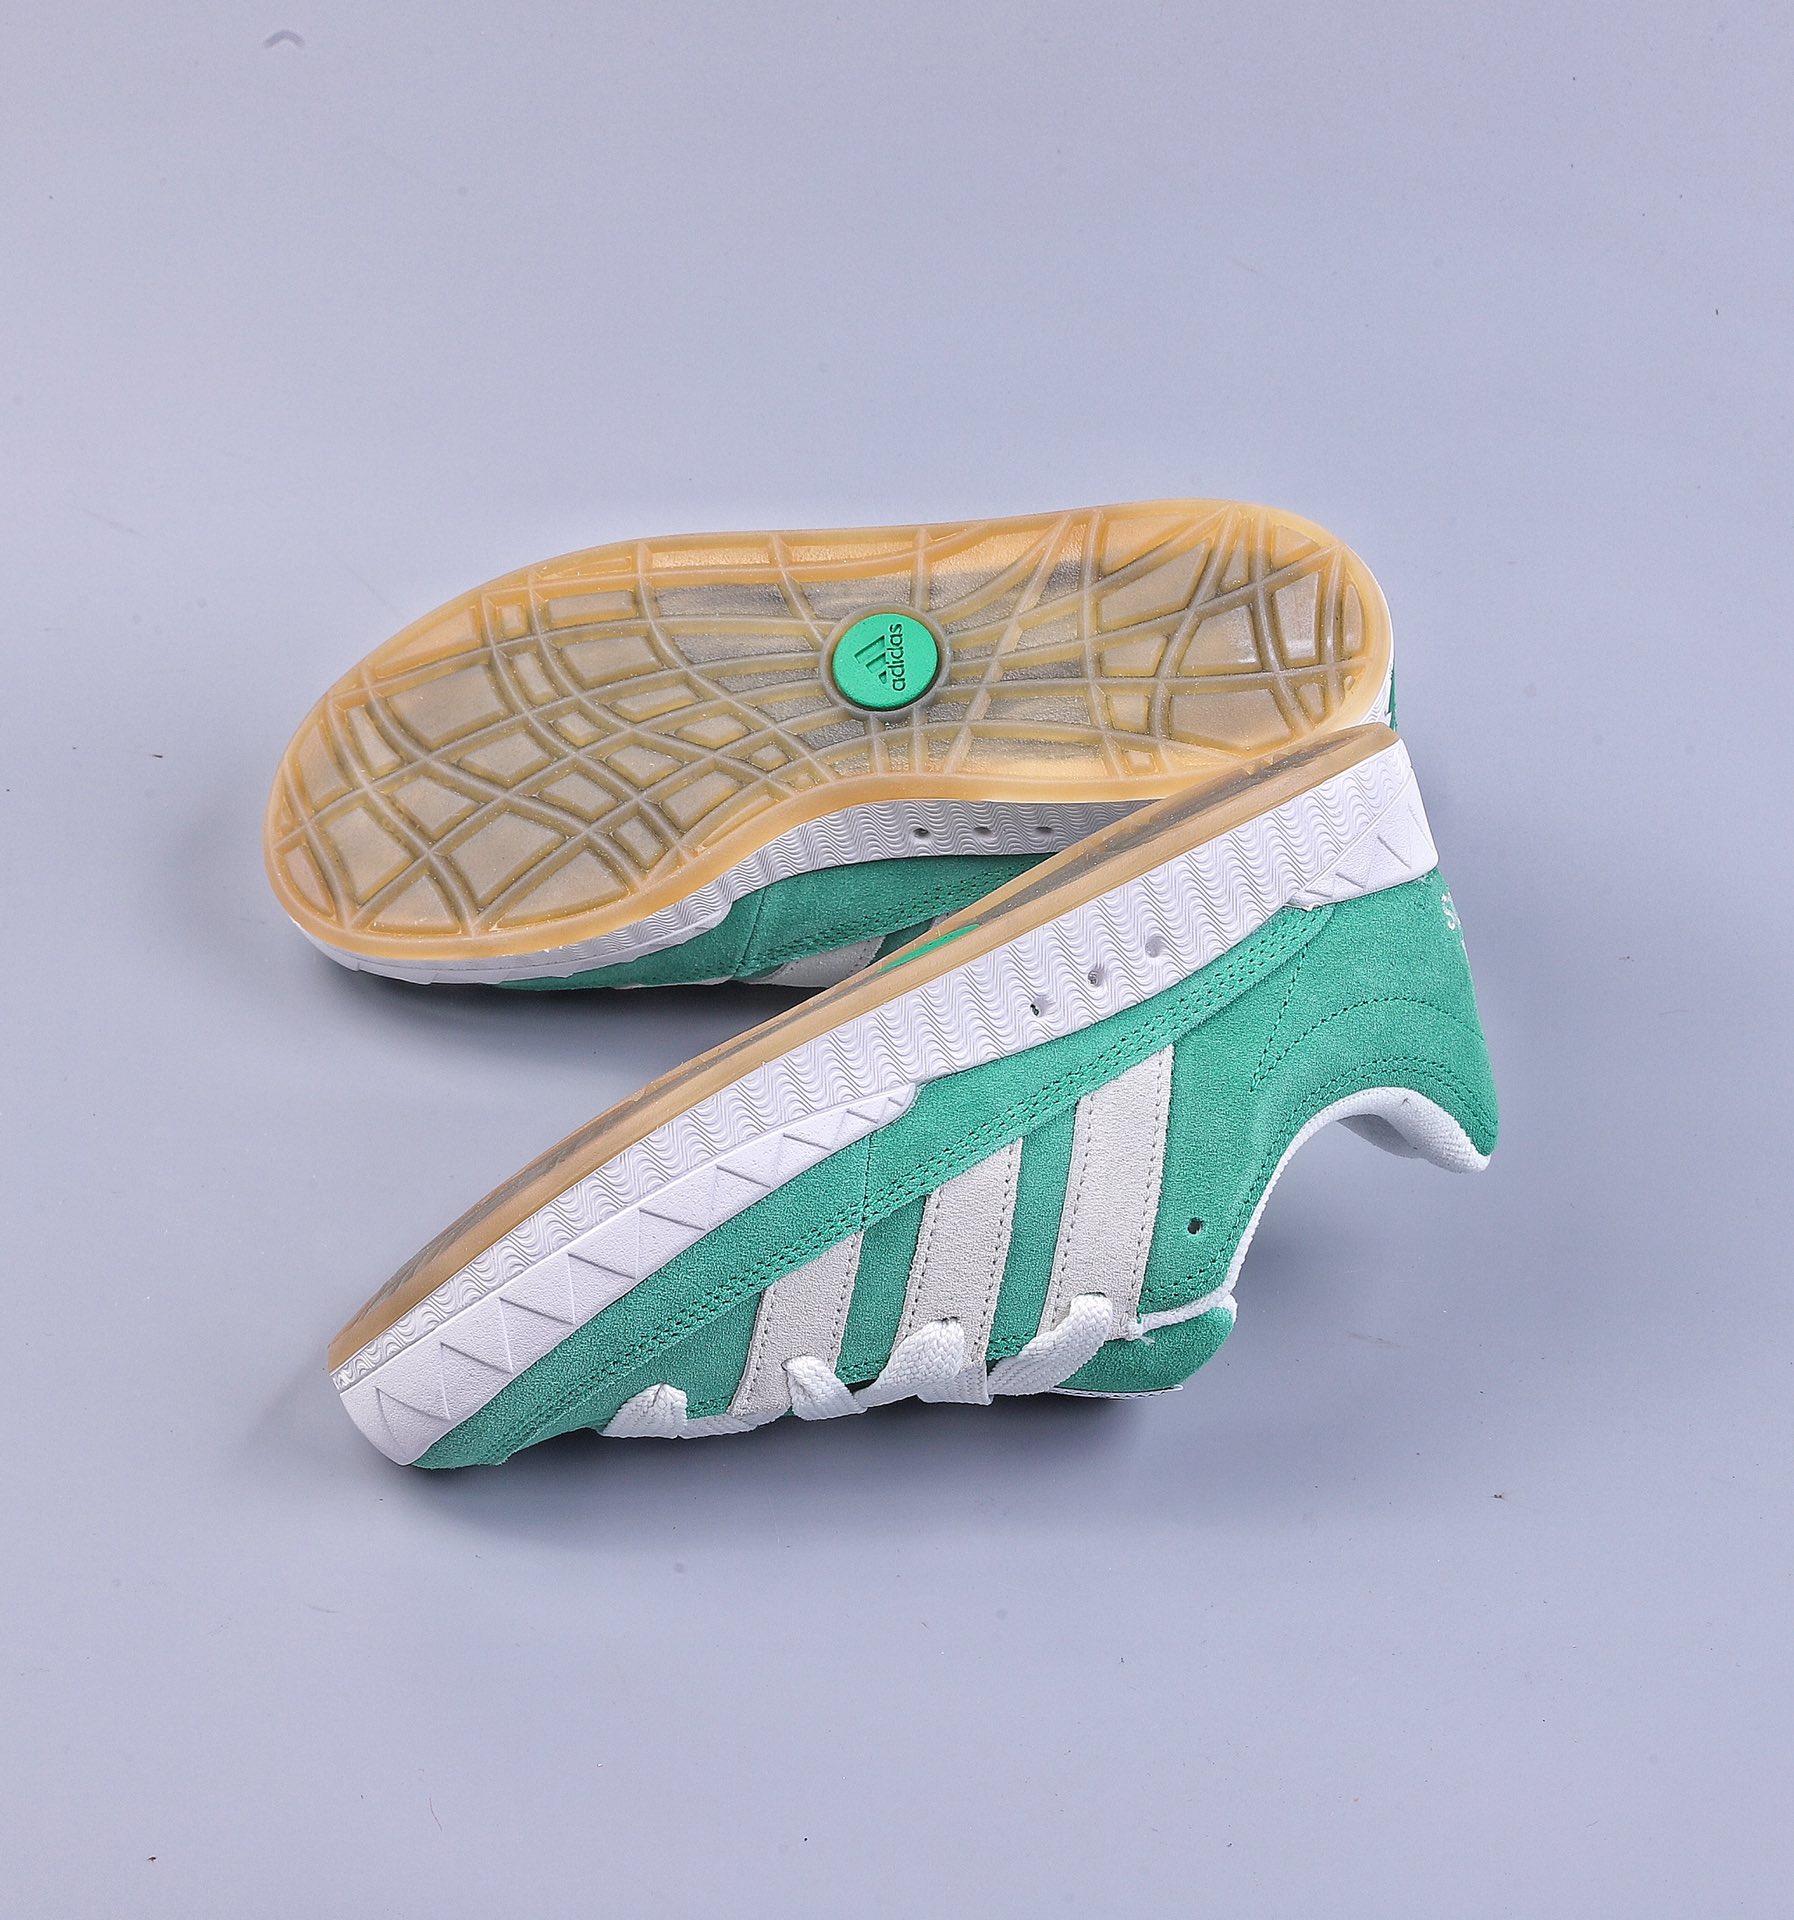 DT Adidas Adimatic Low Matic series low-top retro shark bread shoes sports casual skateboard shoes GZ6202